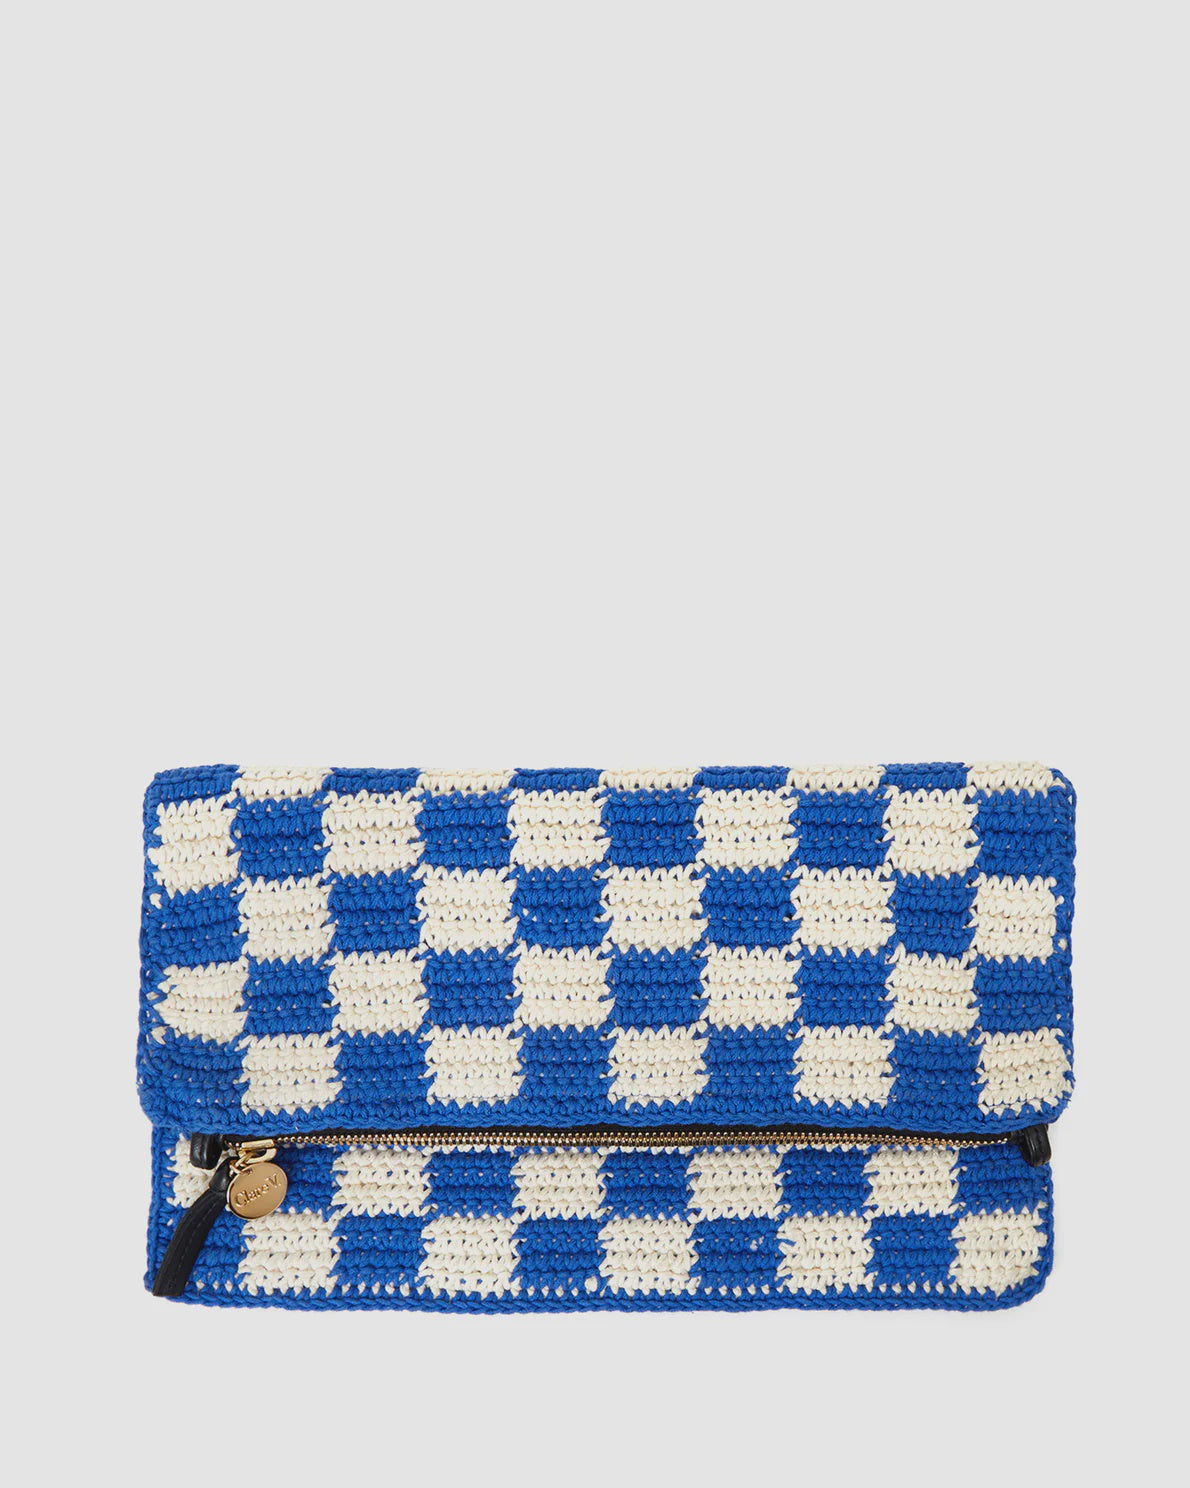 A Clare Vivier Foldover Clutch w/Tabs featuring a blue and white checkered pattern. The bag has a flap closure and a visible zipper pocket on the front adorned with a small gold-colored charm. The background is plain white.